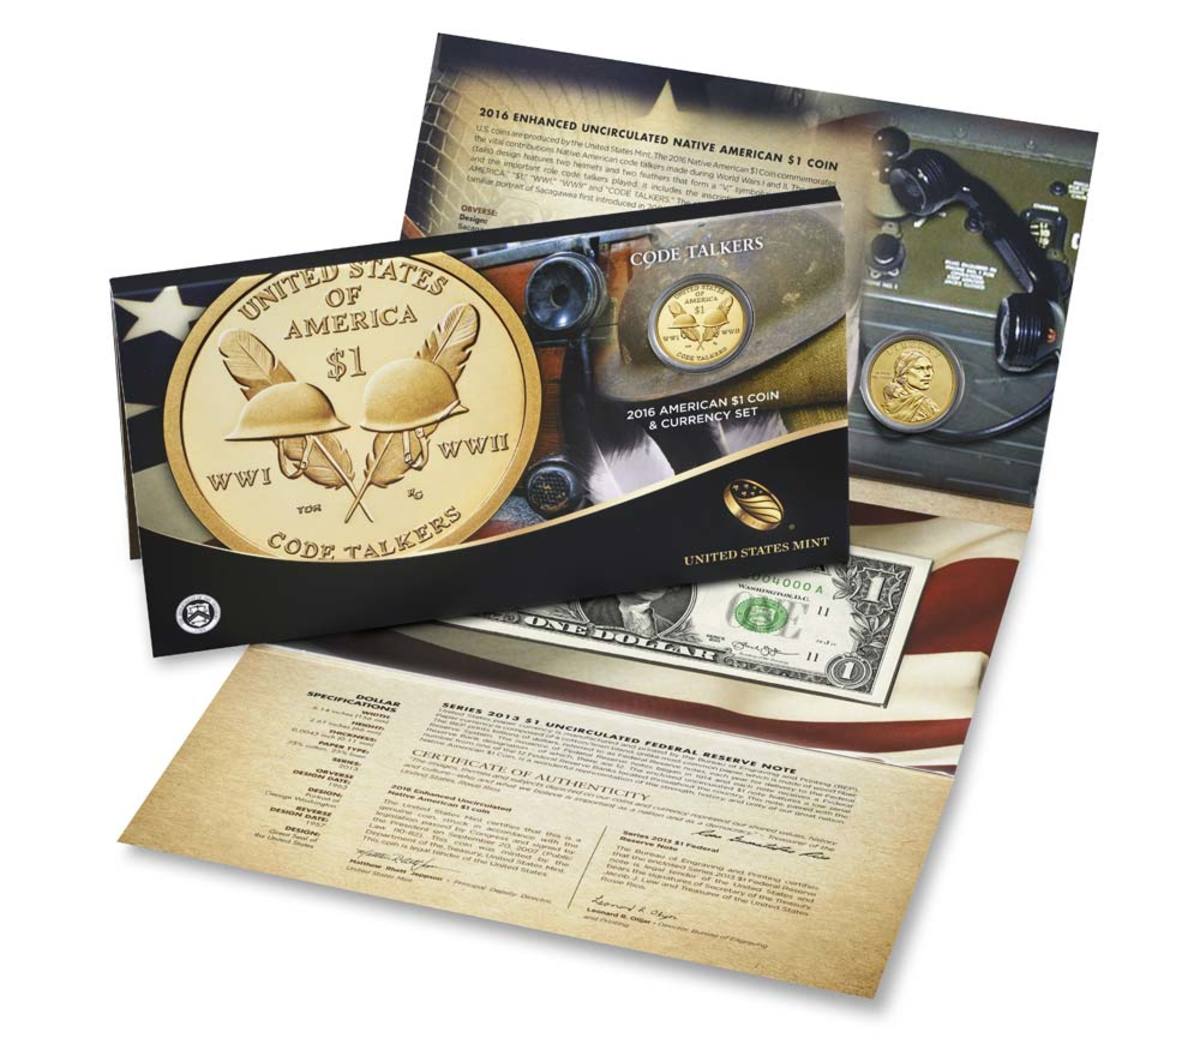 Image of the 2016 Native American Dollar Coin and Currency set.